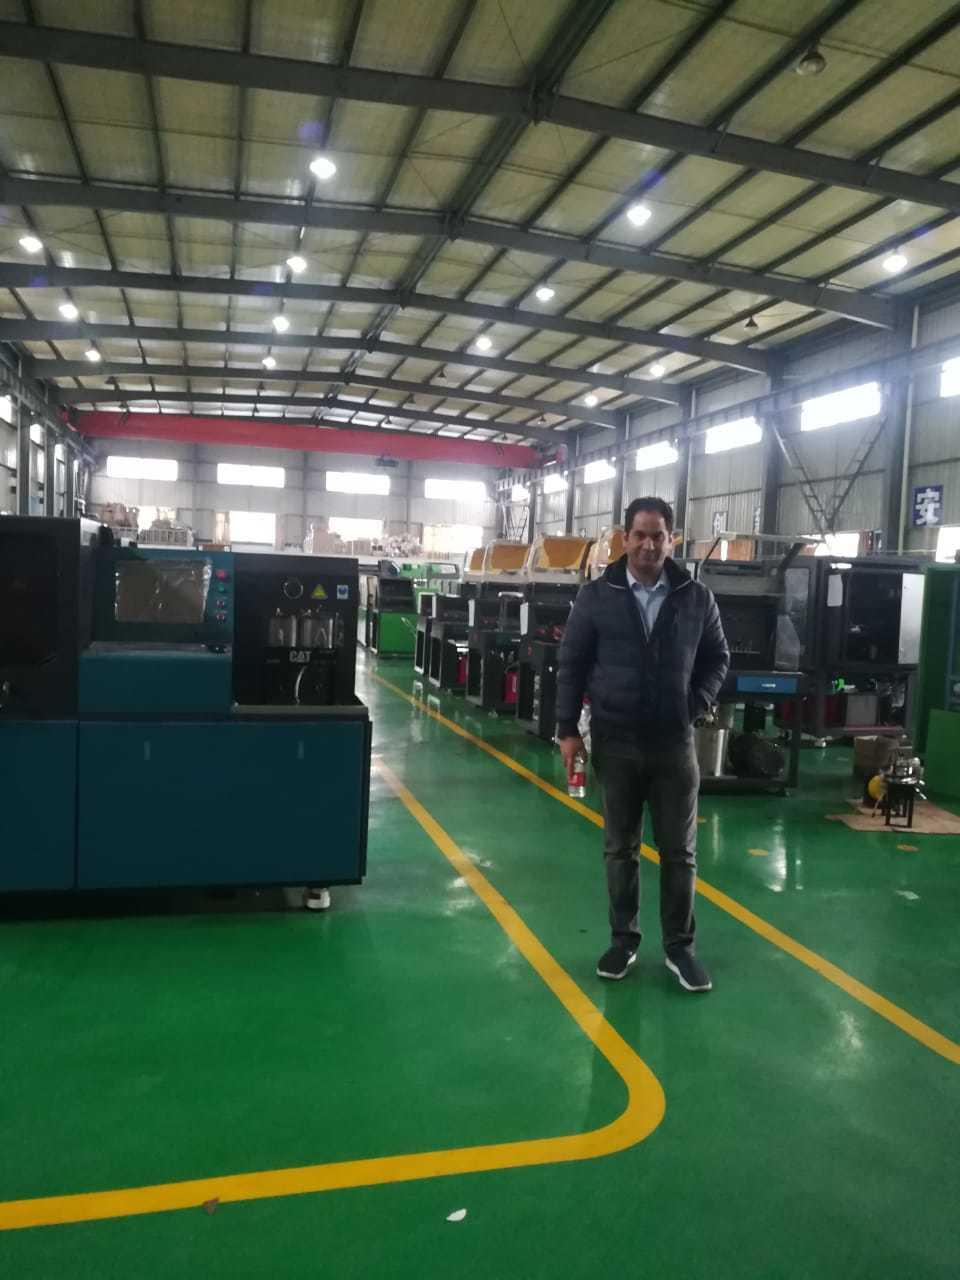 Common Rail Injector Test Bench, Diesel Tester with Coding Injector